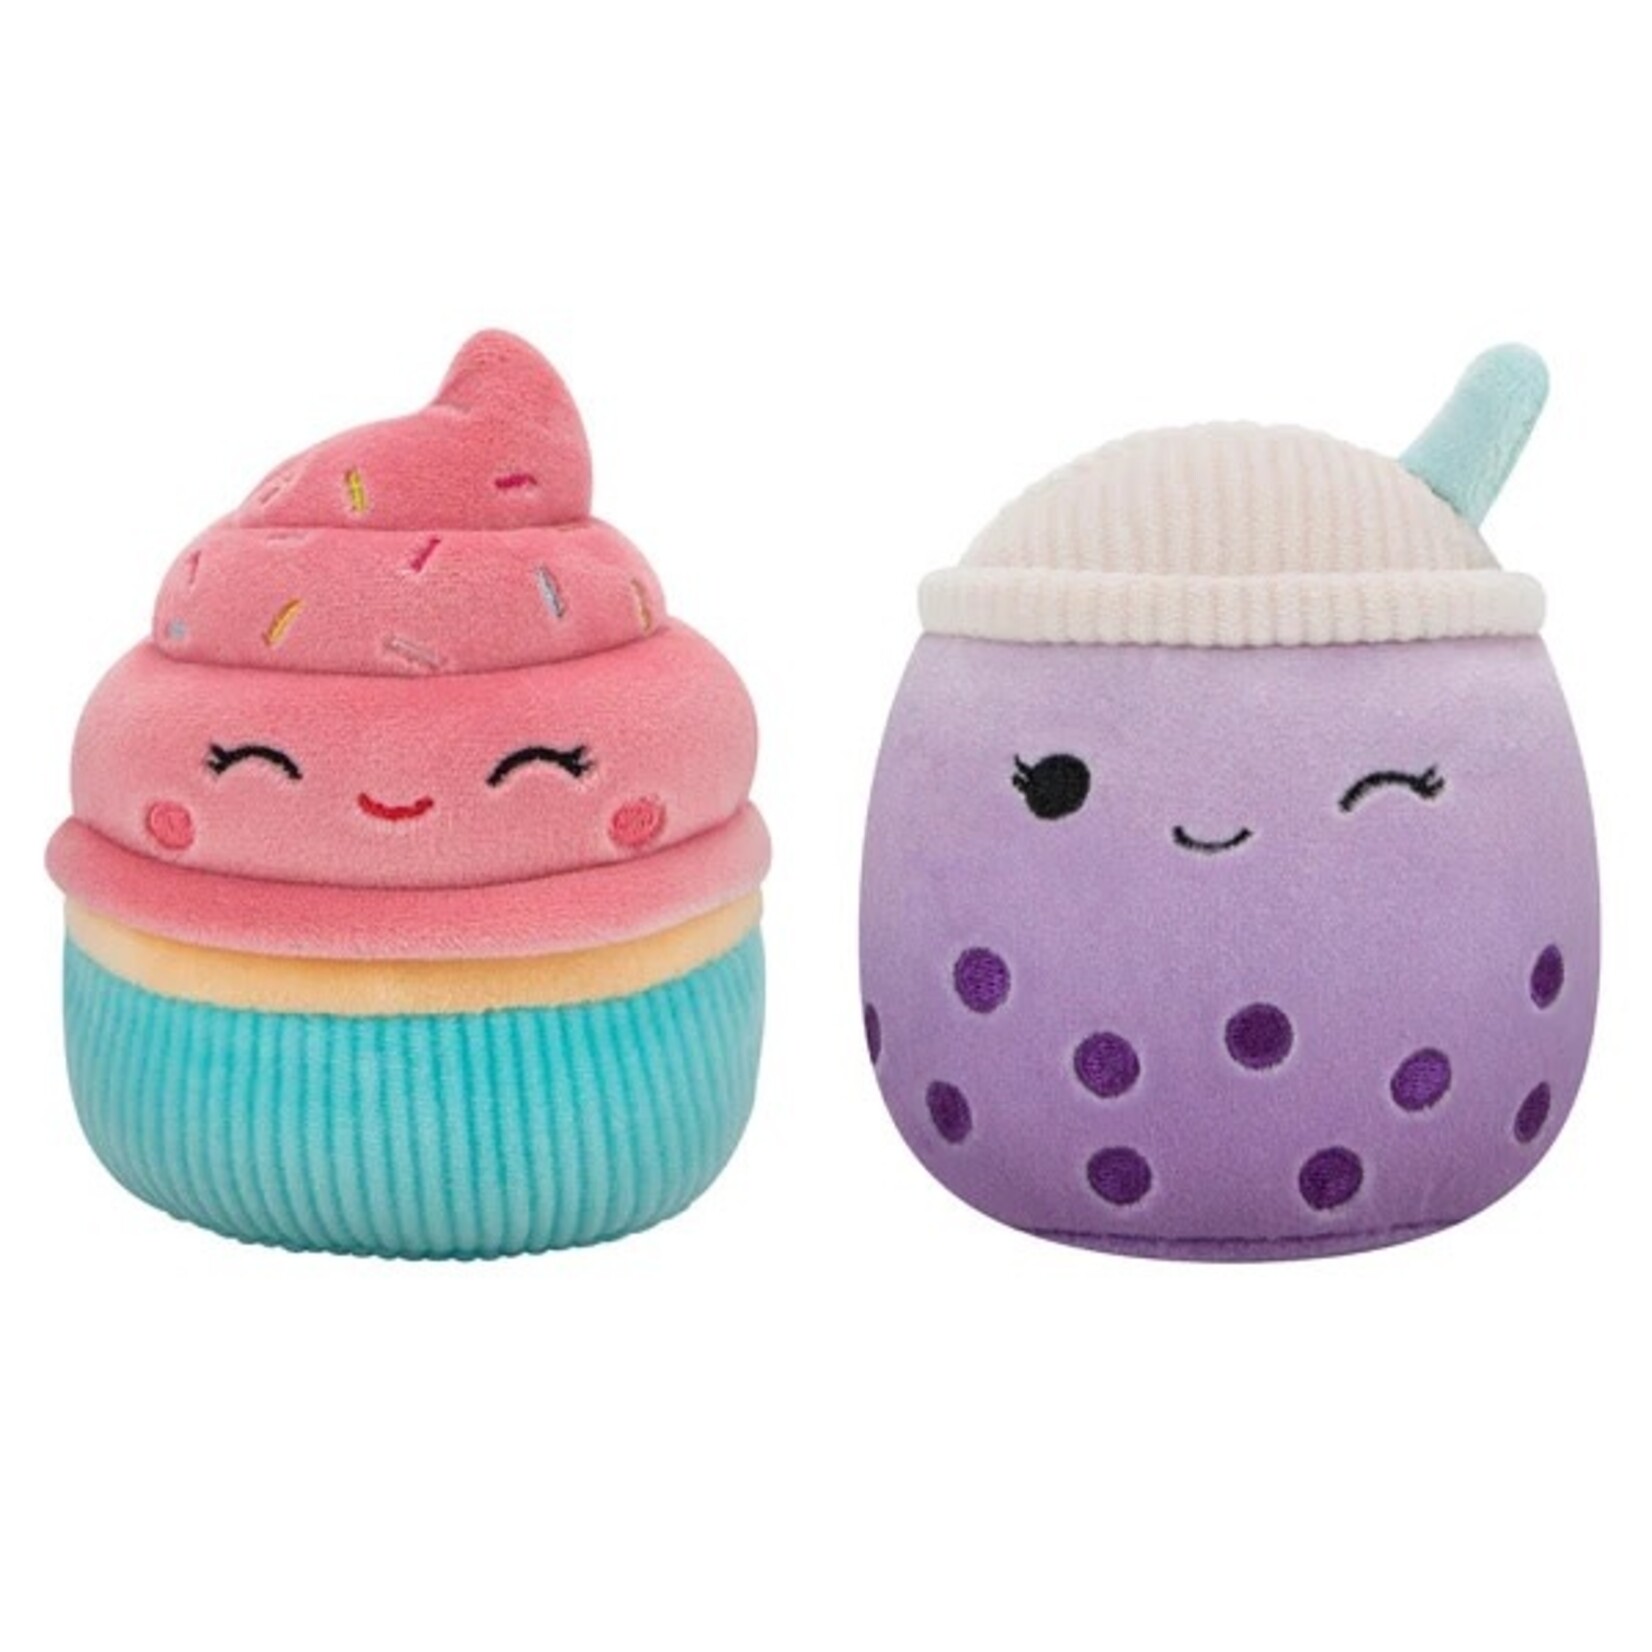 Jazwares Squishmallows Sweets Squeaky Plush Dog Toys, Poplina & Diedre